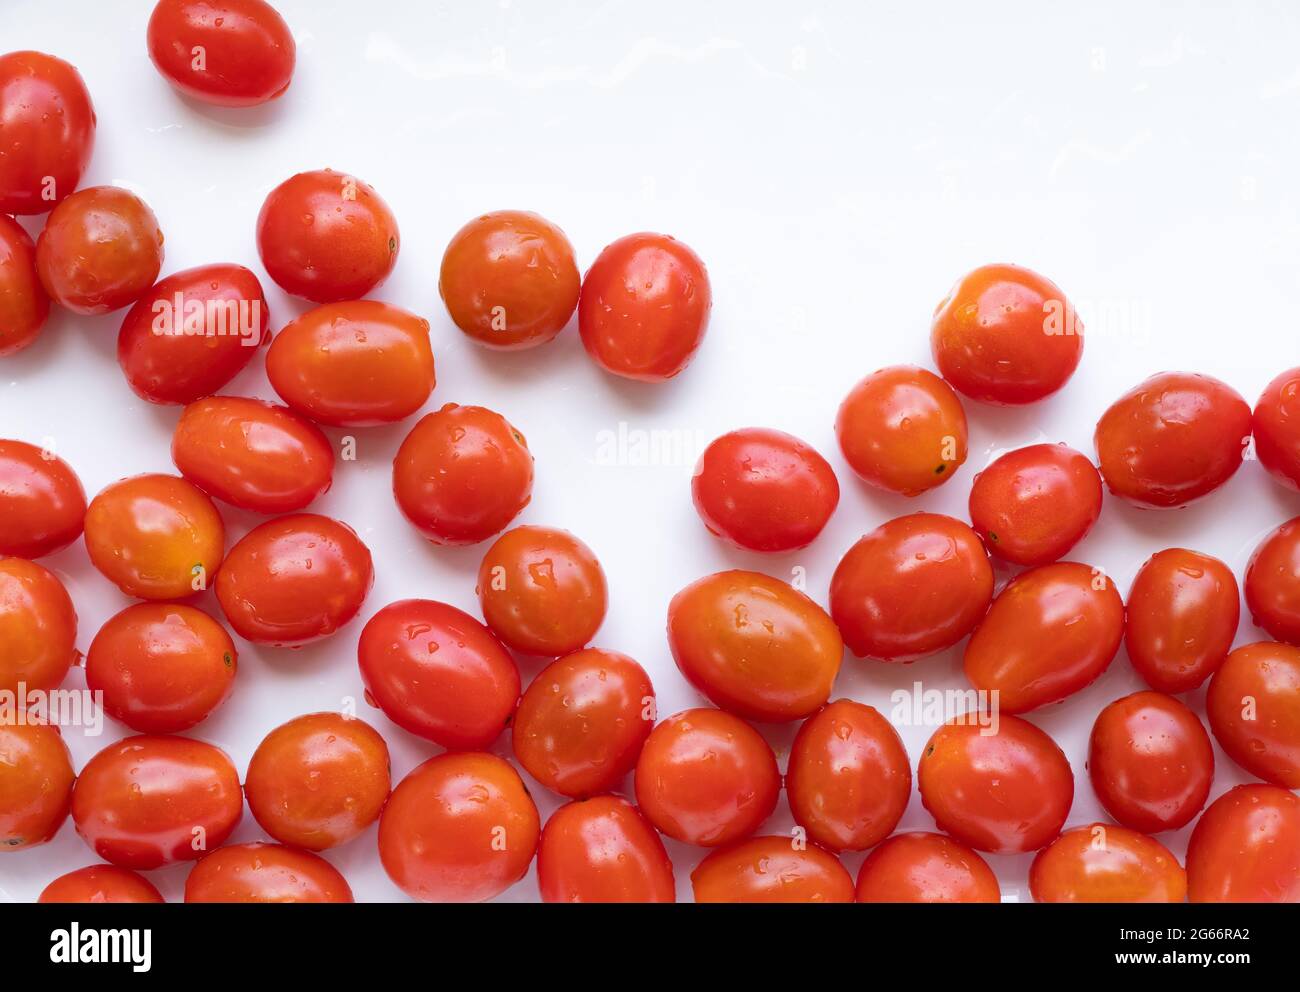 High angle view of full frame image of bright red tomatoes. Stock Photo